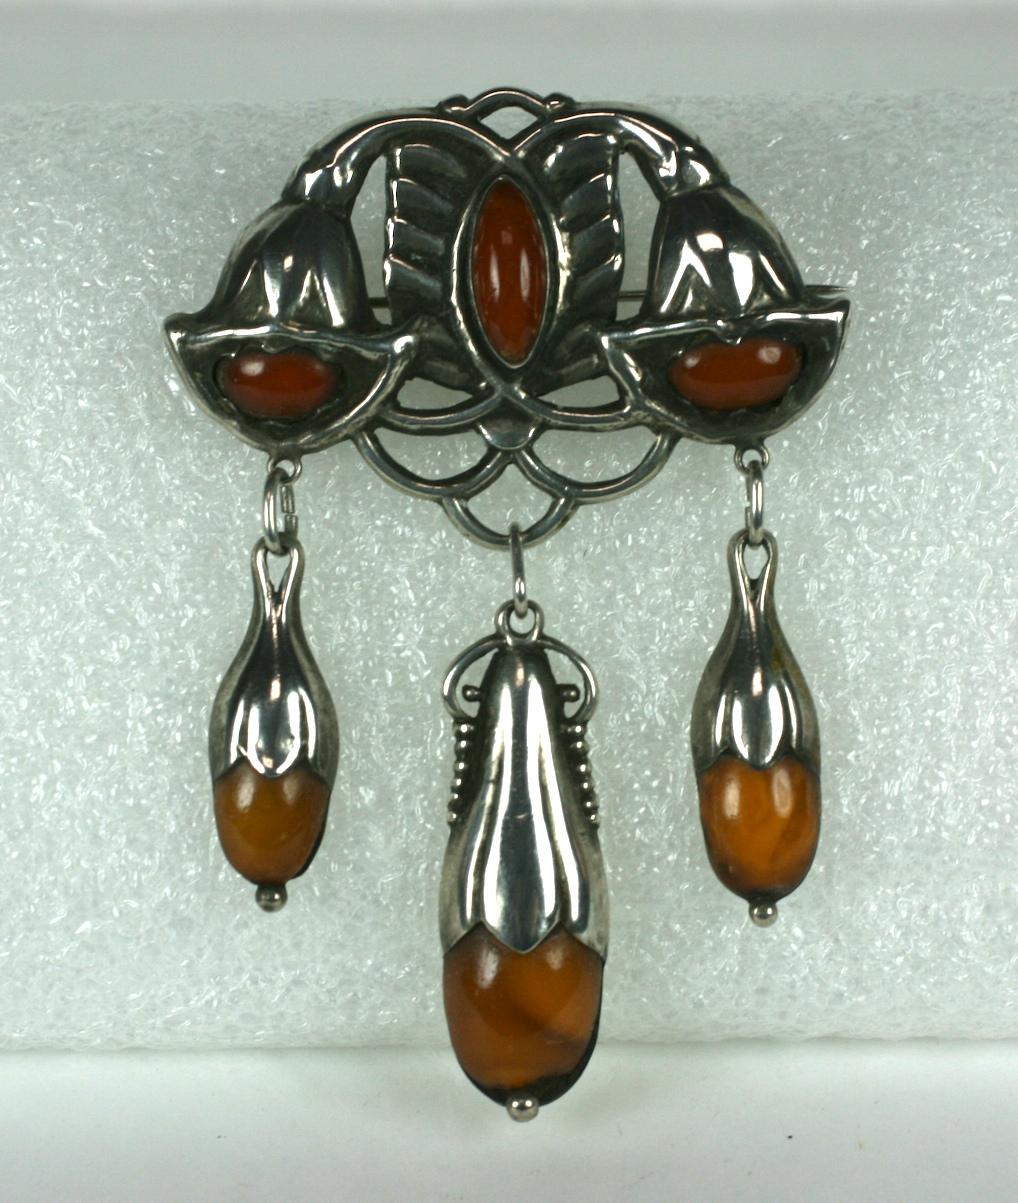 Massive Jugenstil Amber Drop Brooch from the early 20th Century. Constructed of 830 grade silver with natural amber centers and drops in a hand raised floriform brooch. Scandanavian Art Nouveau Period, Signed HF. 1920's. 2.5